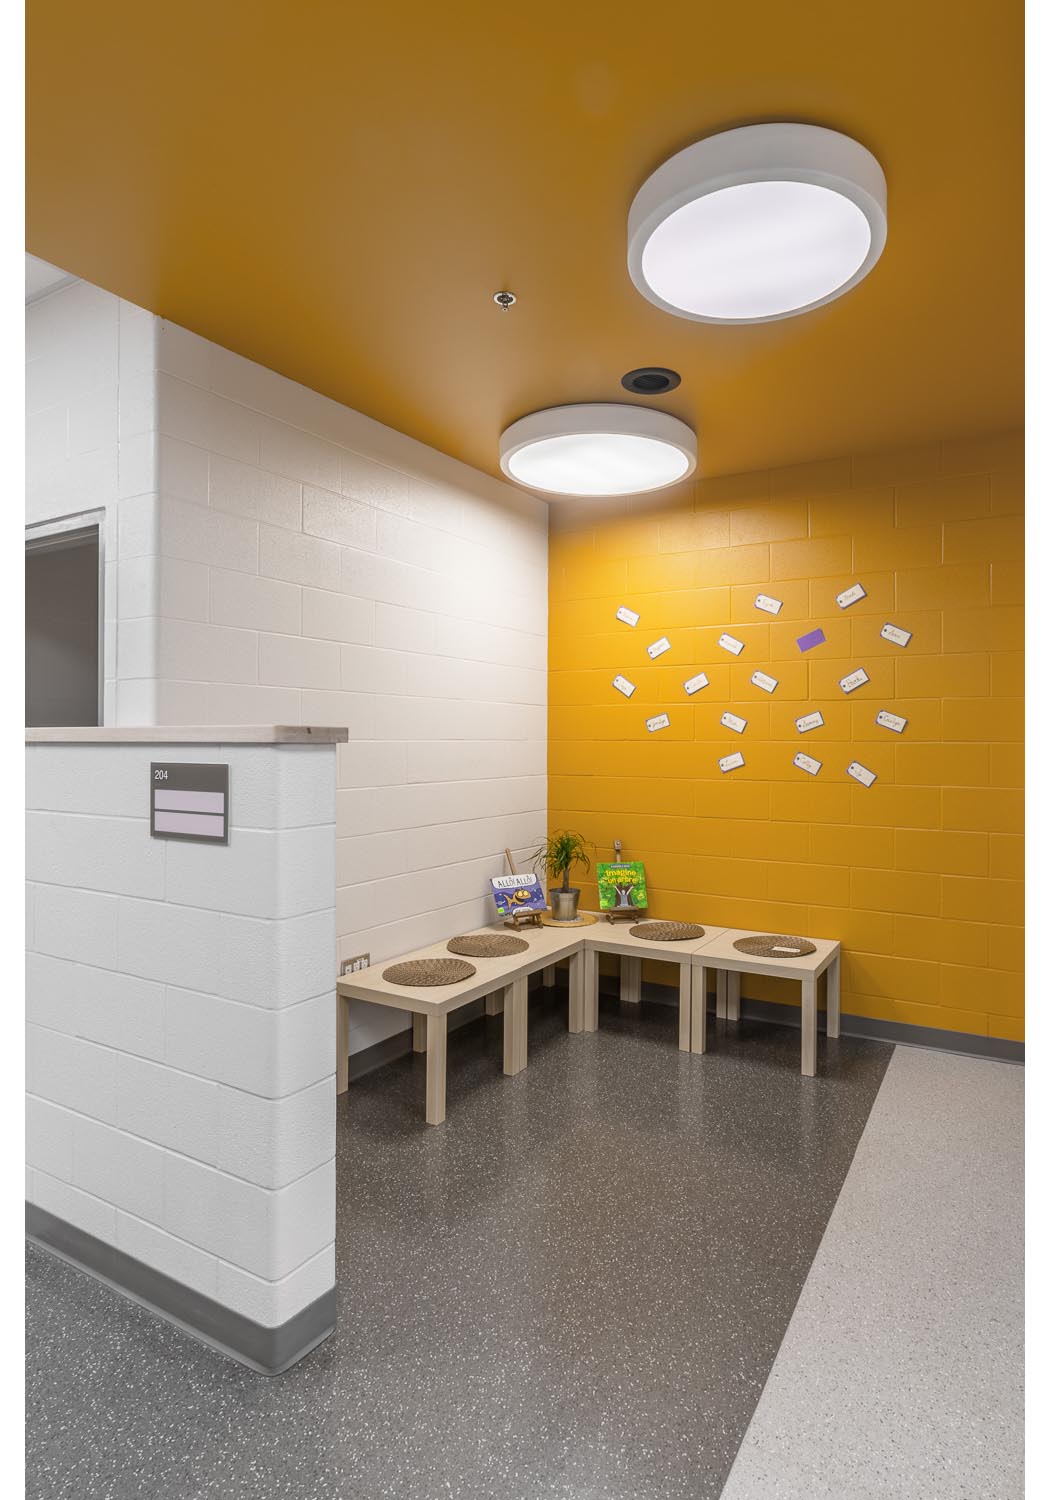  Ecole Rivière Rouge Elementary, interior photo of classroom entry nook / Photo:  Lindsay Reid  